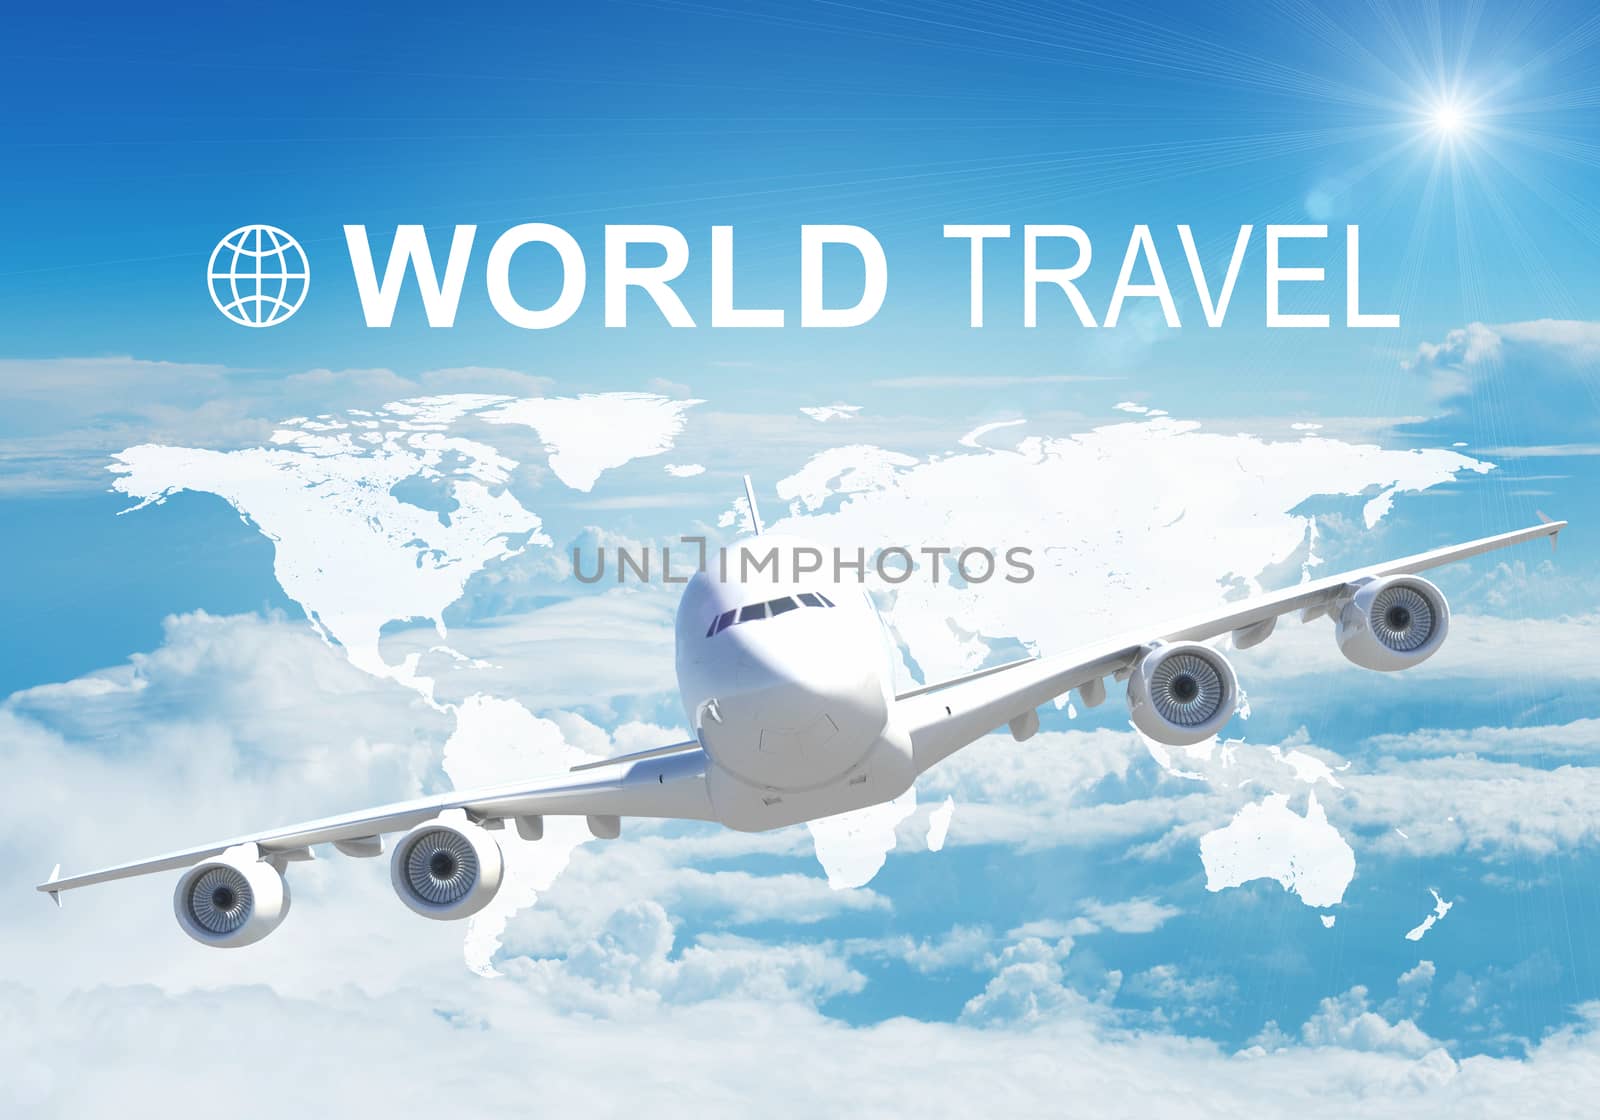 Contoured map of world continents, inscription World Travel and related symbol. Flying jet airliner on foreground, cloud layer and sky as backdrop